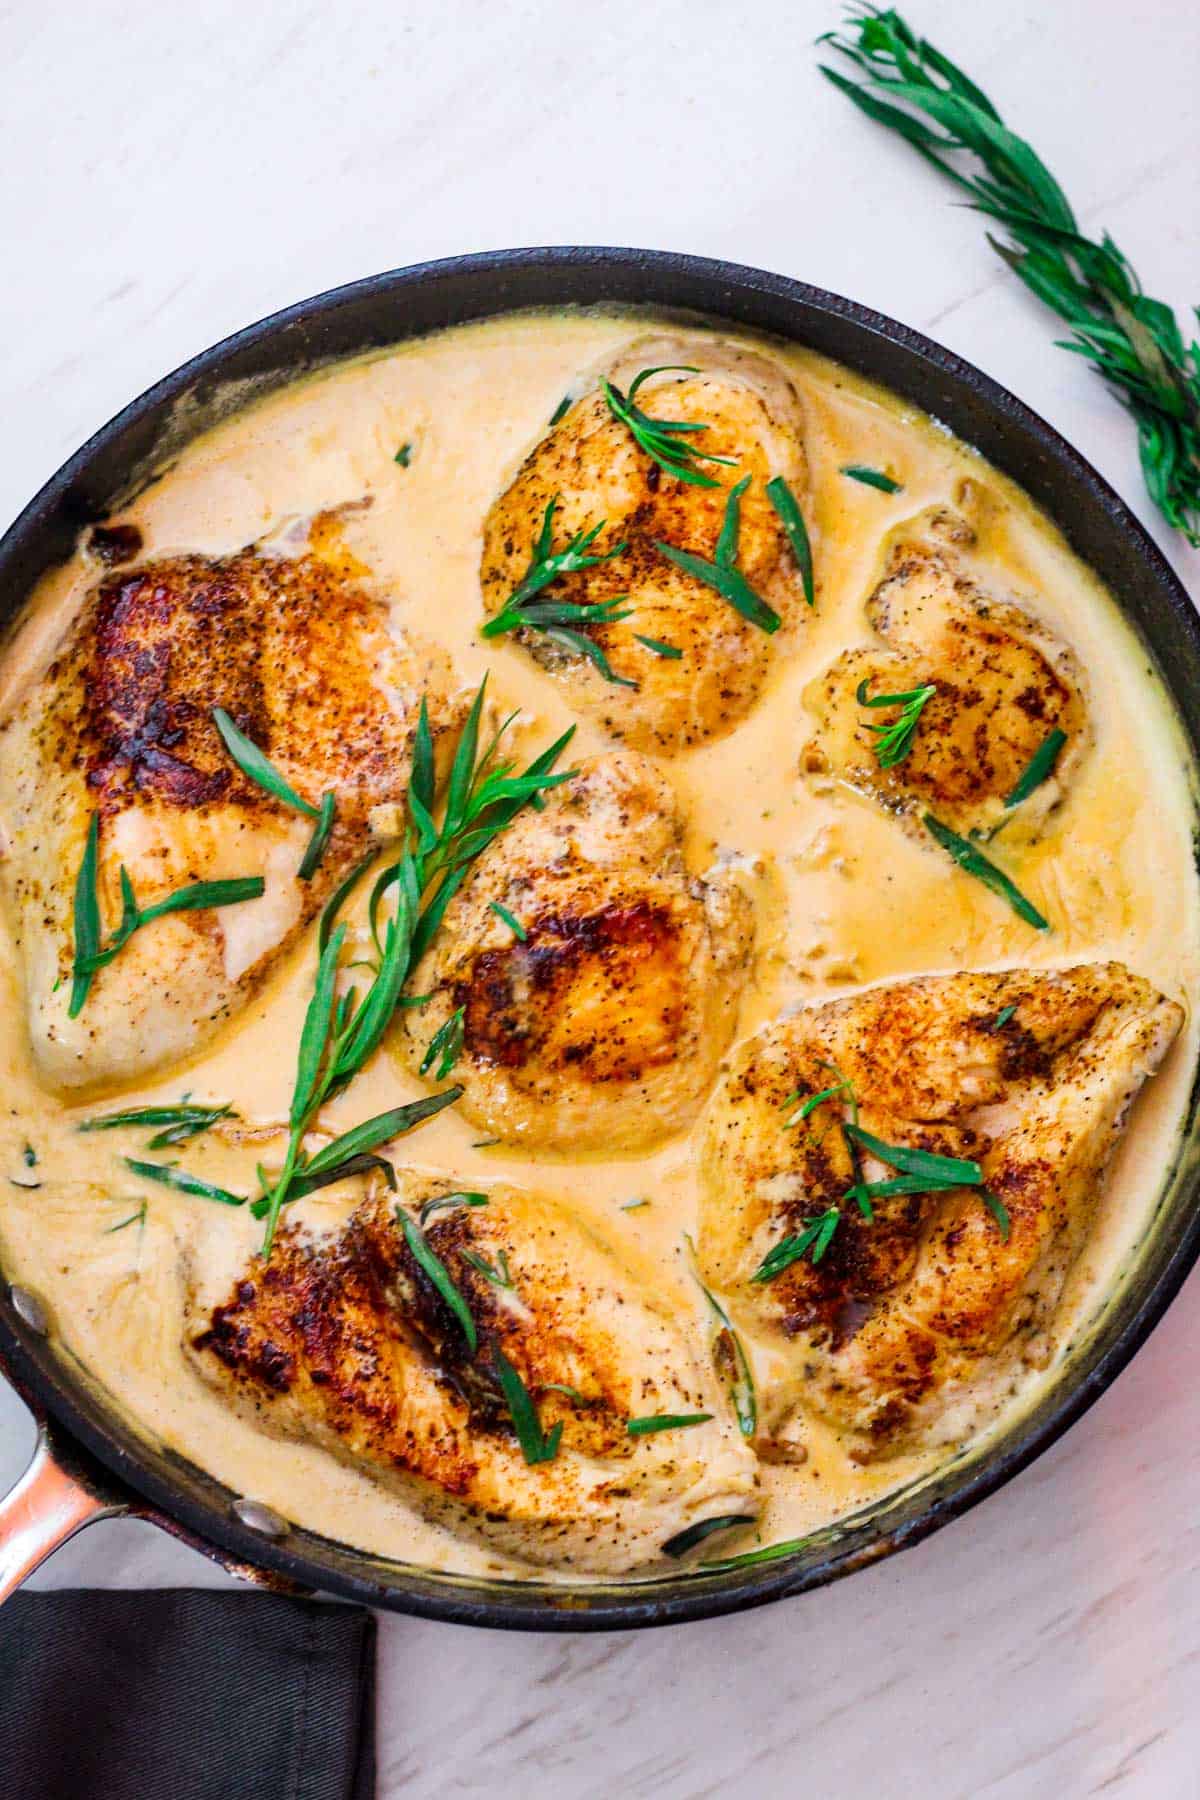 Tarragon chicken in white wine sauce, shown in a skillet already cooked and garnished with tarragon.